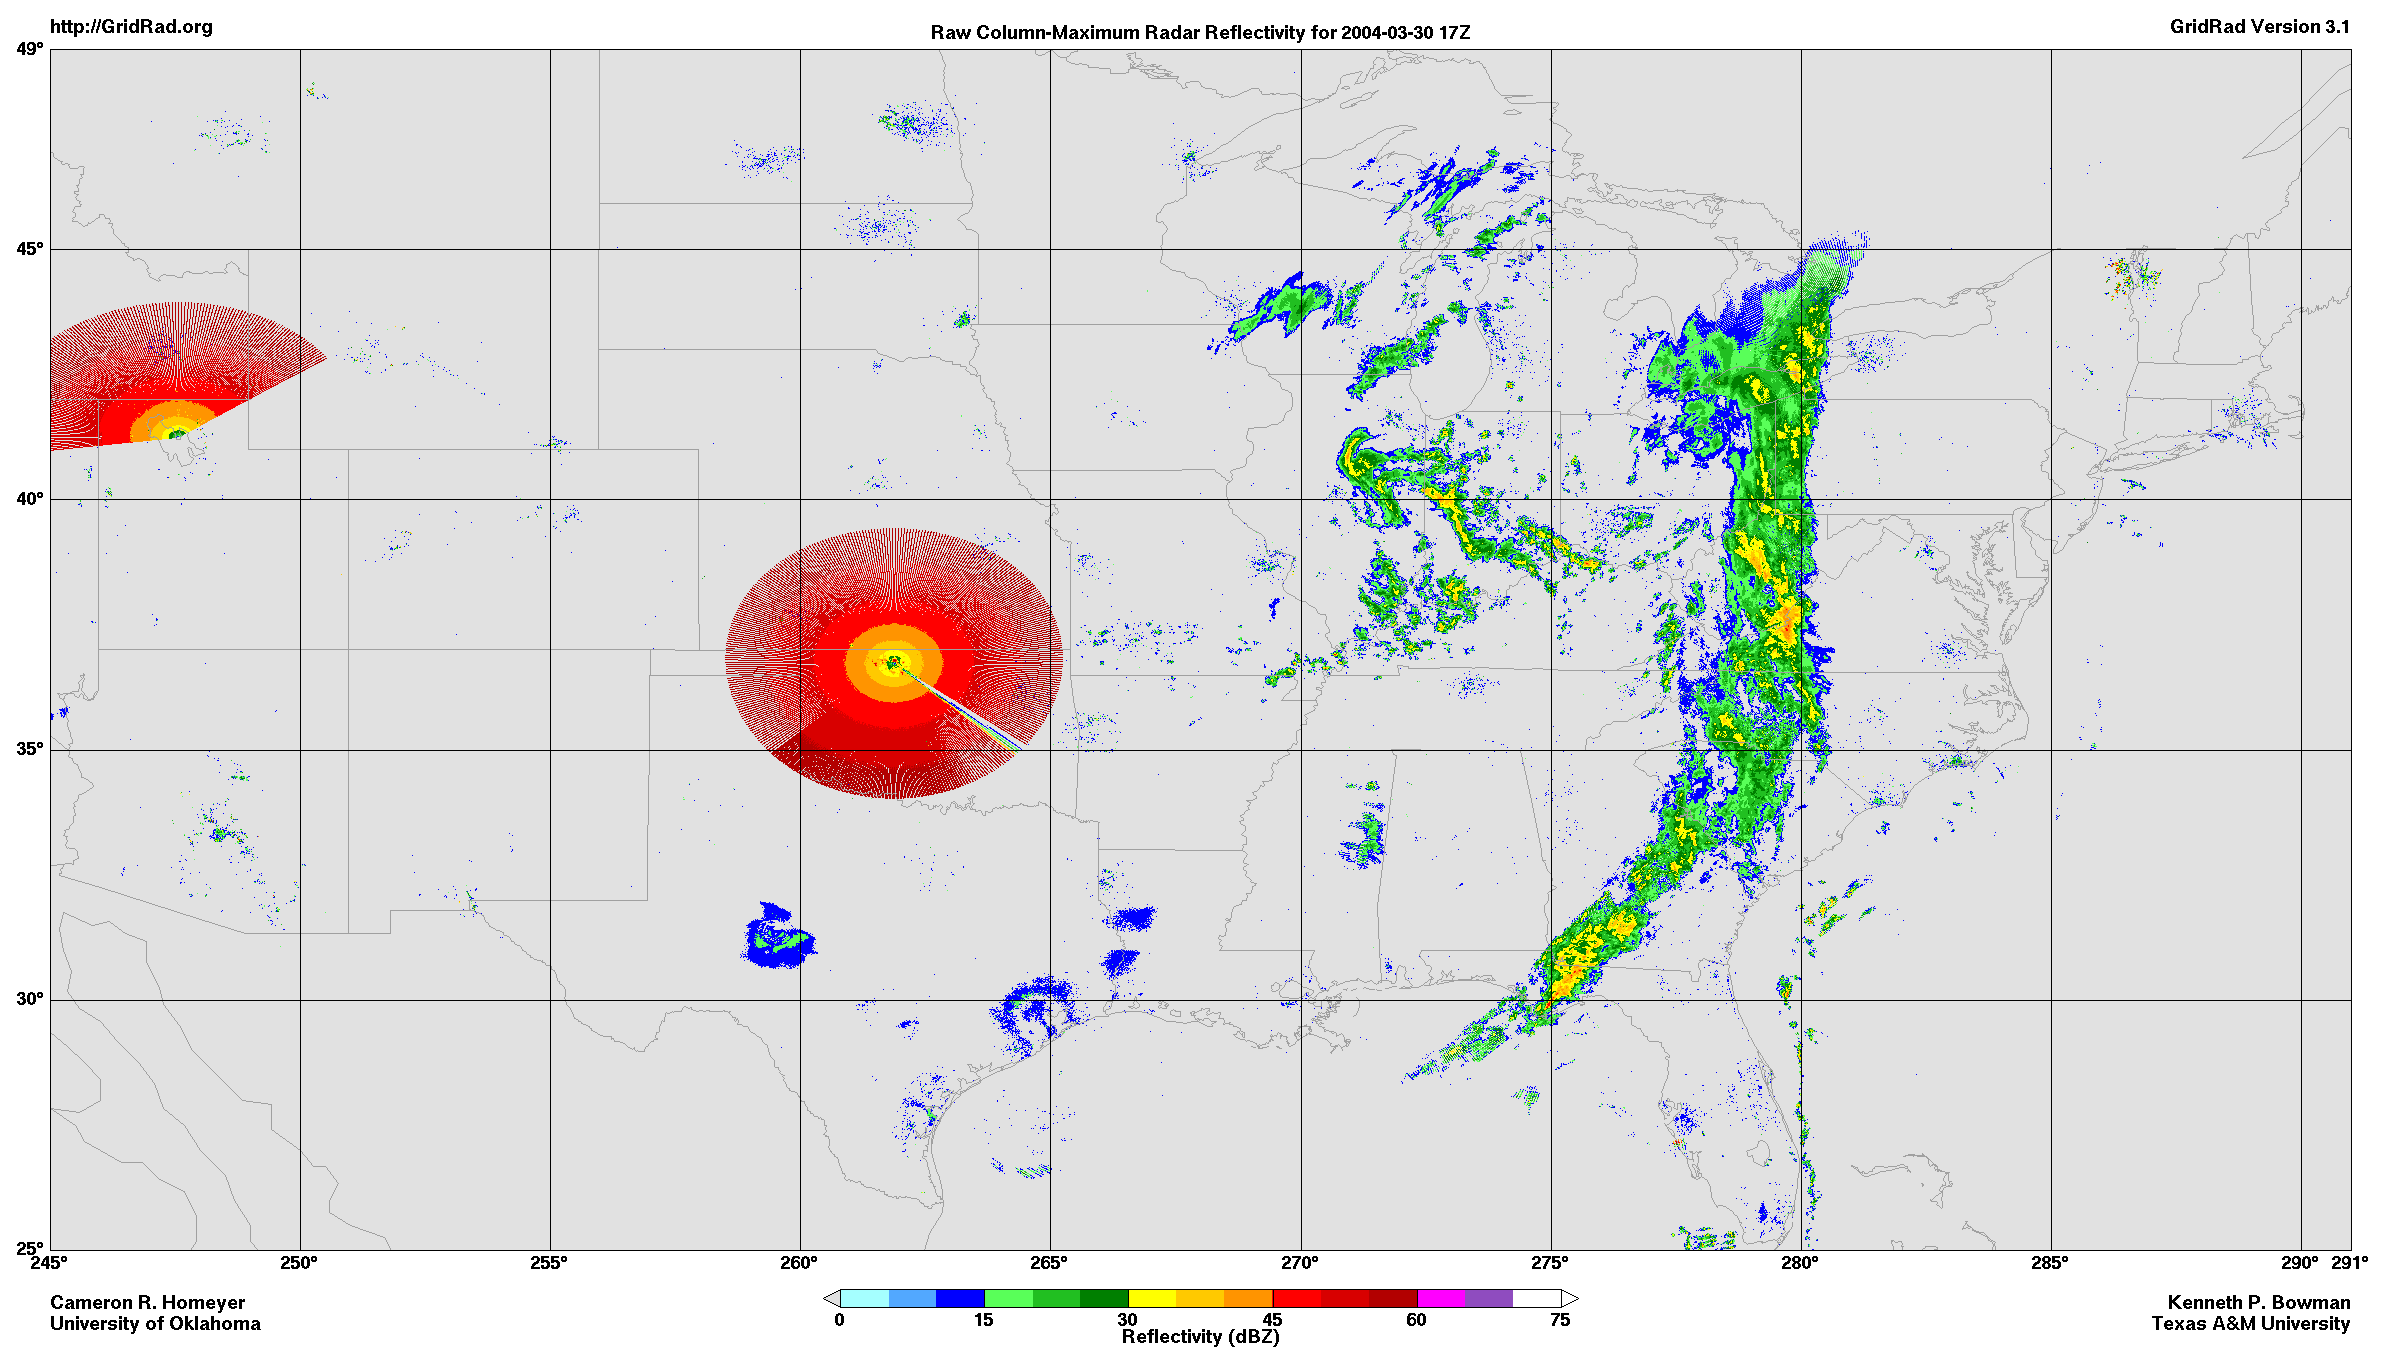 This image is an example of a radar reflectivity map created using GridRad data.